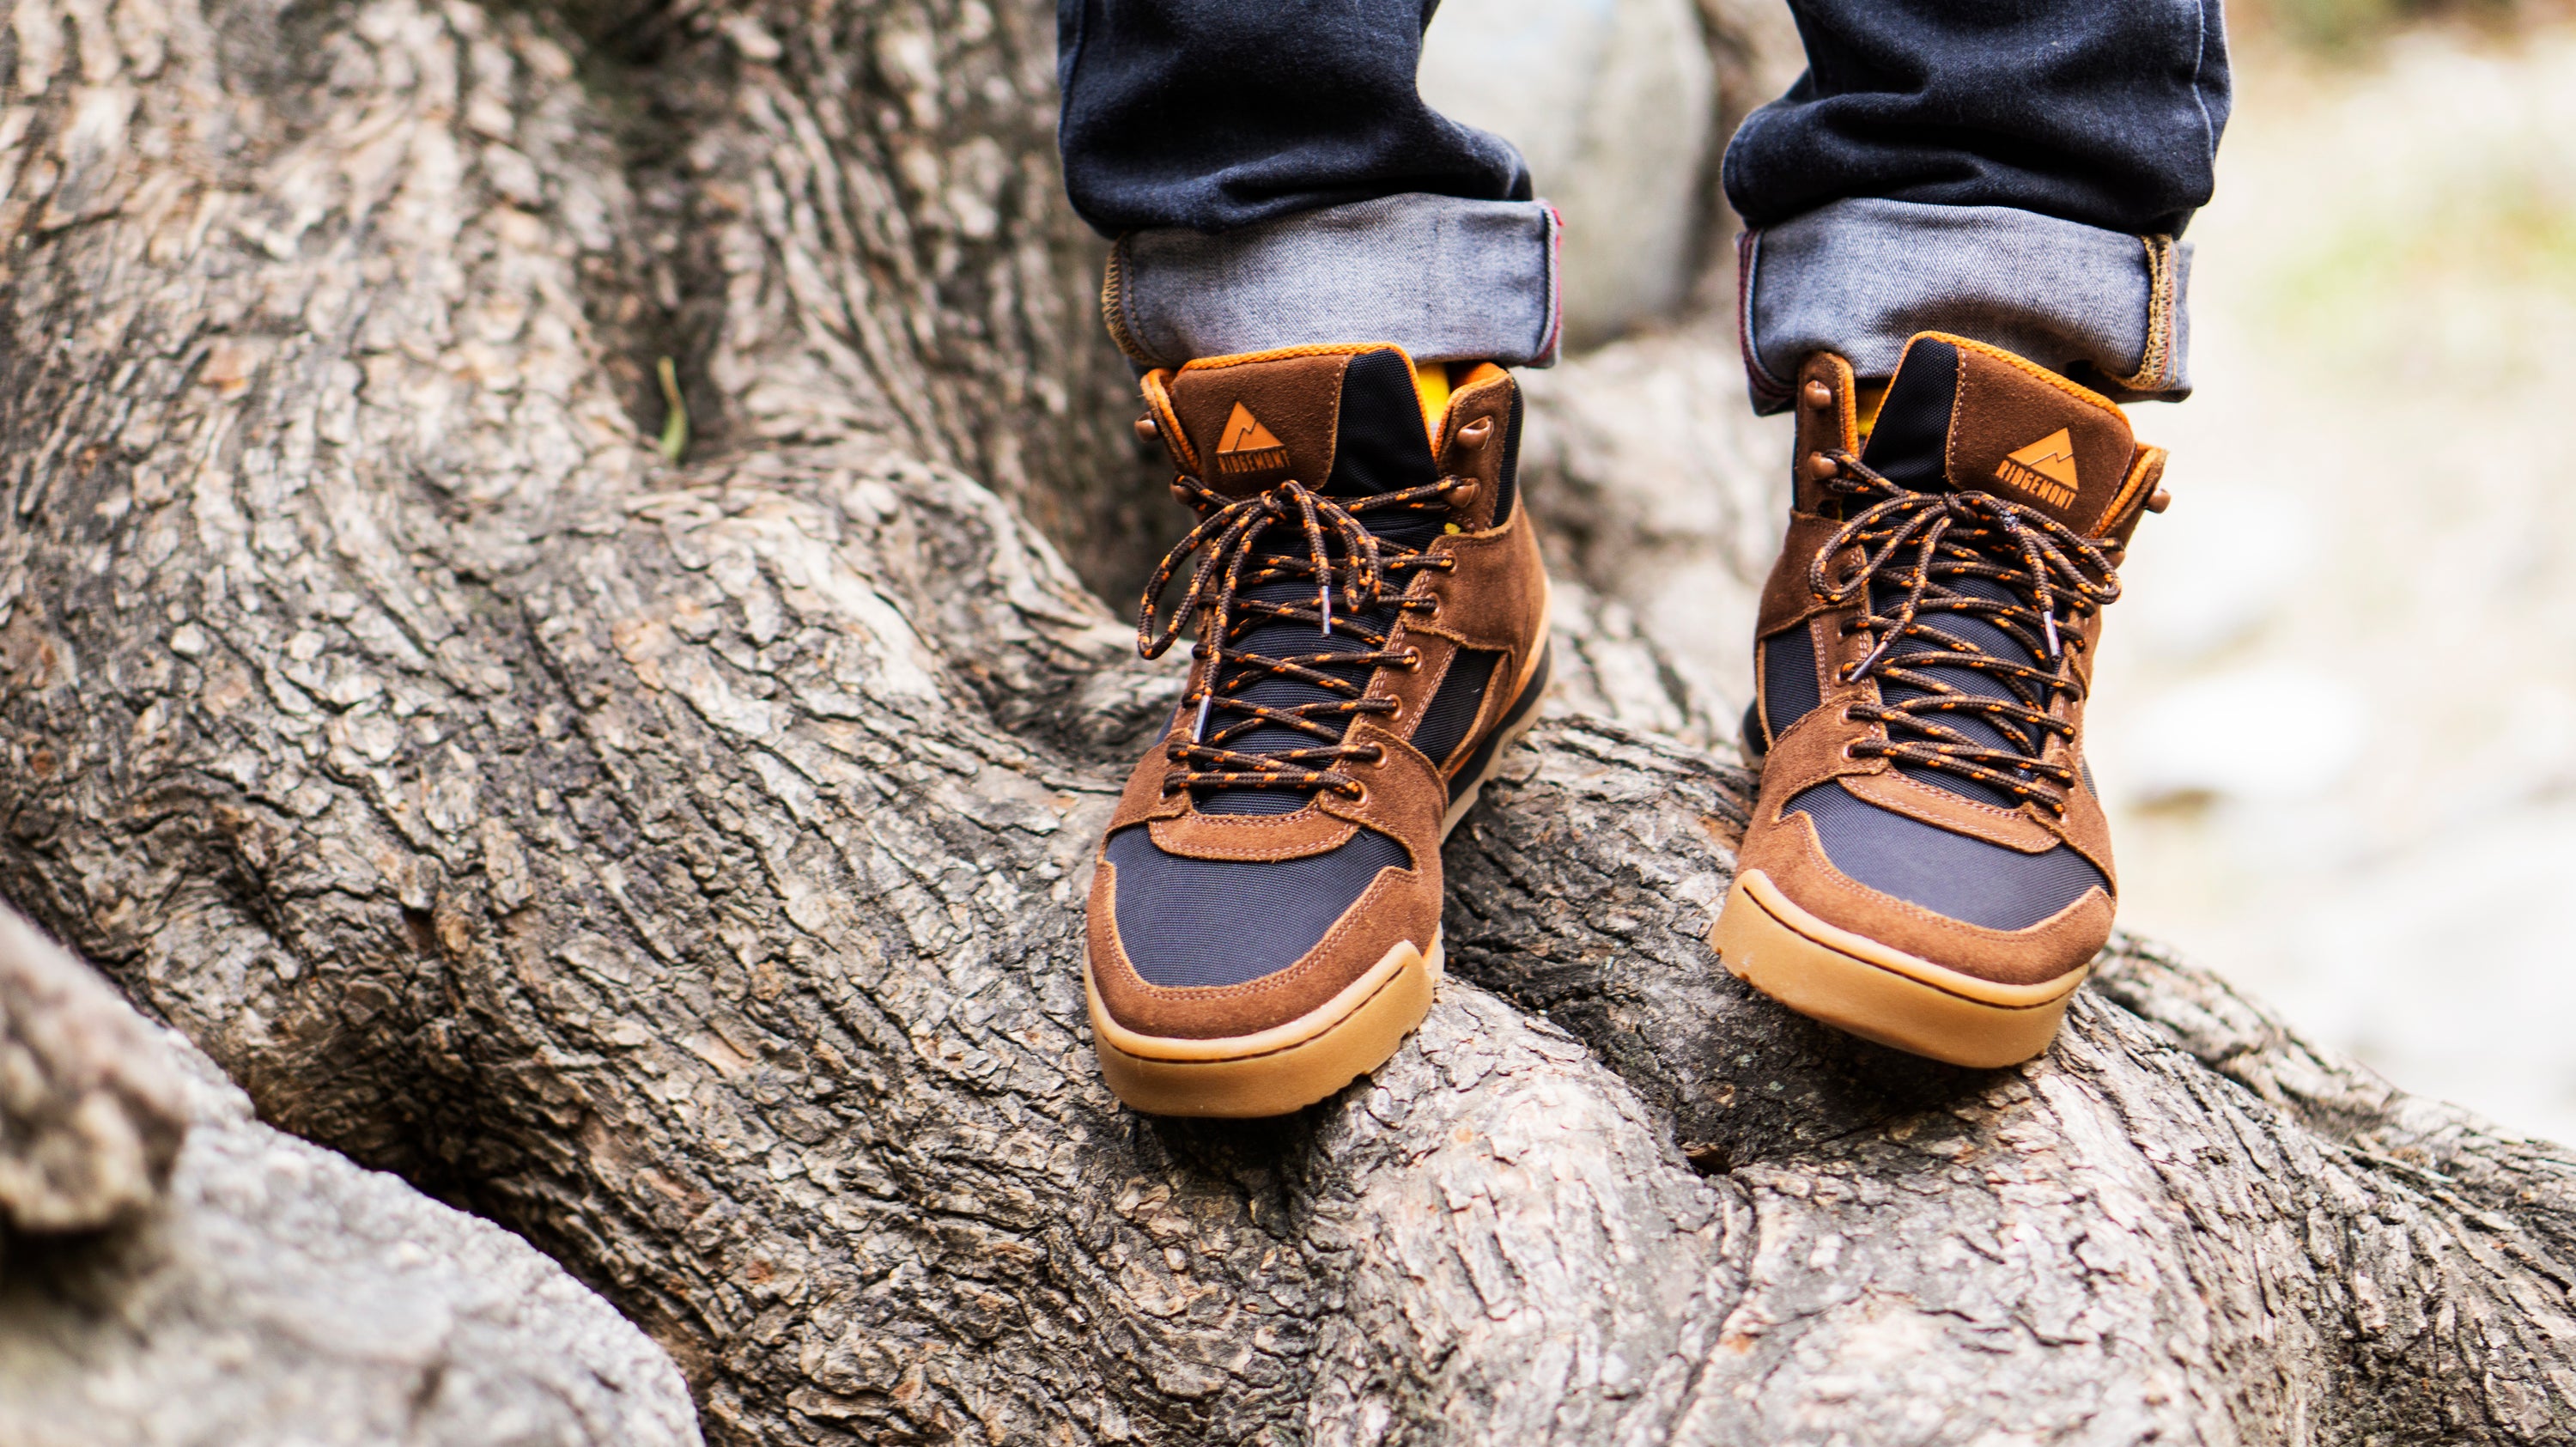 Best Stylish Hiking Boots in 2021 for Men and Women